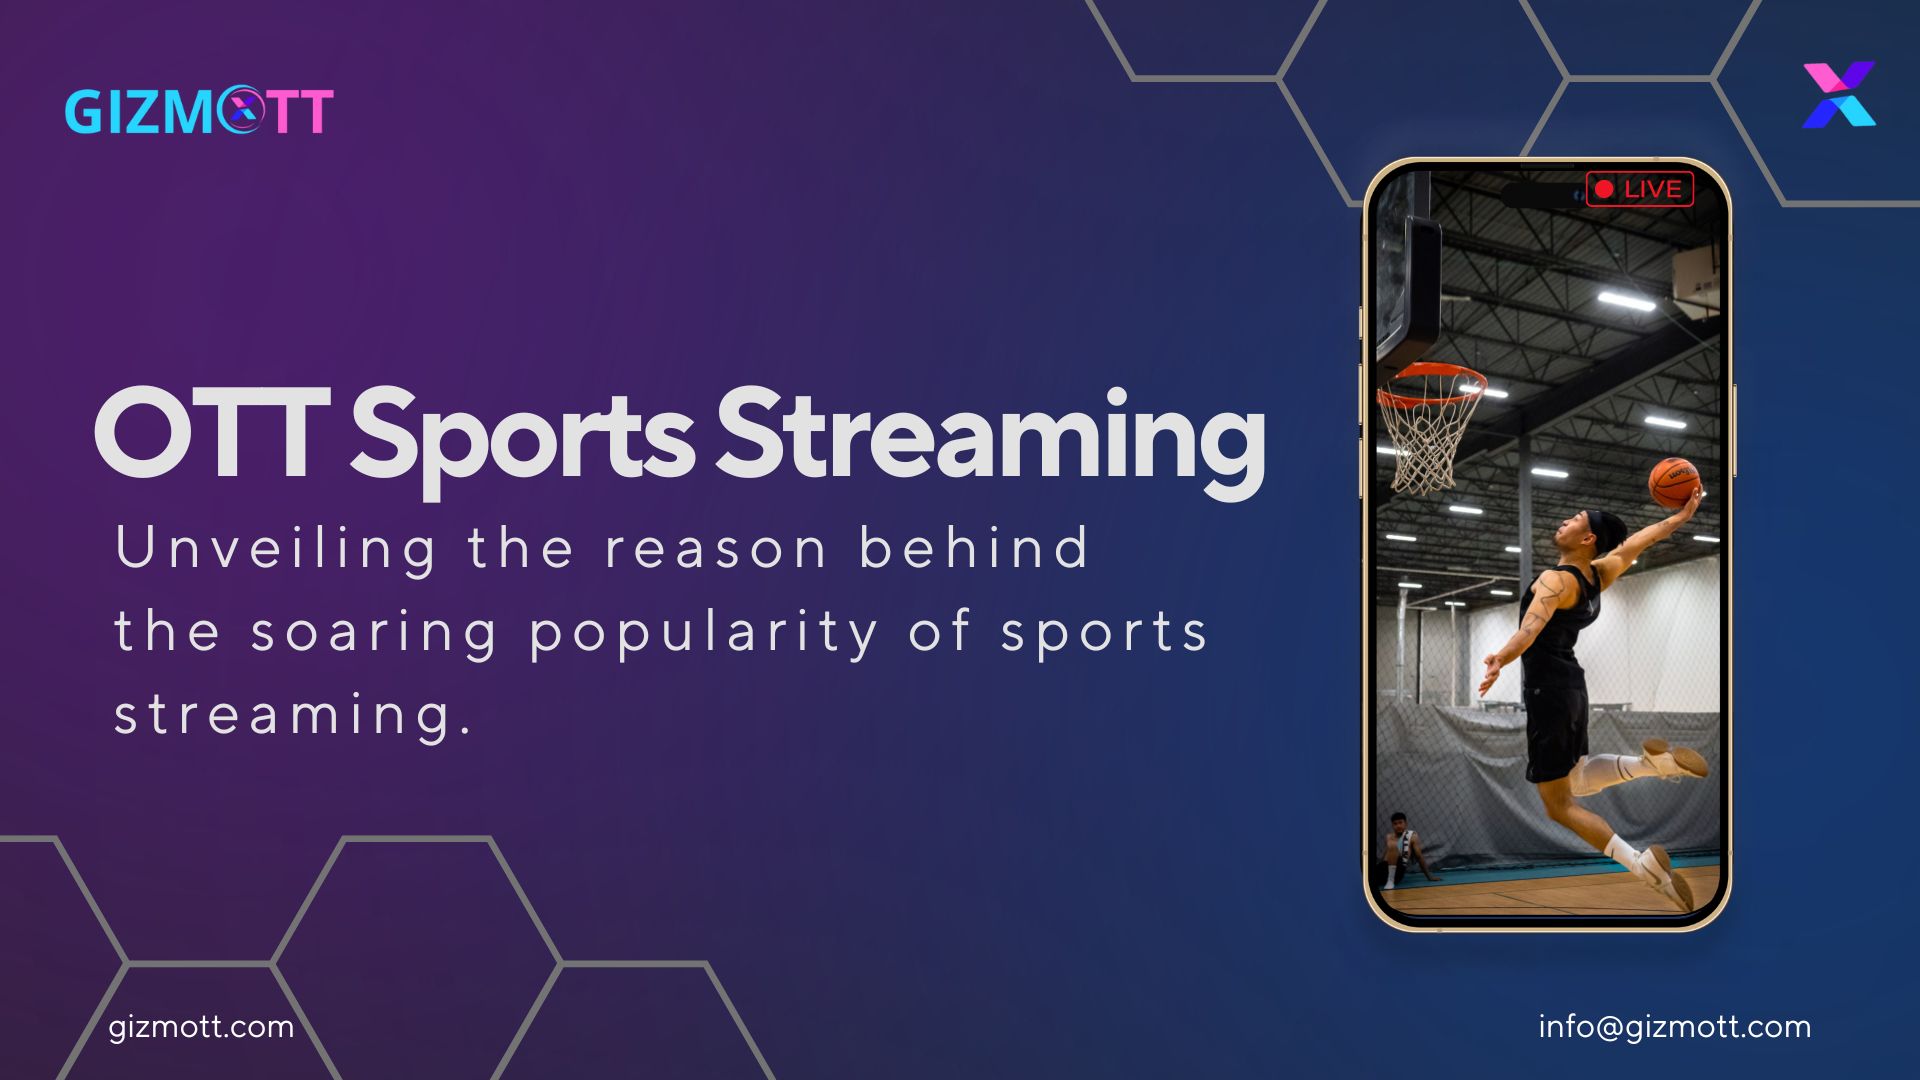 OTT Sports Streaming: A Game Changer for Organizers and Broadcasters